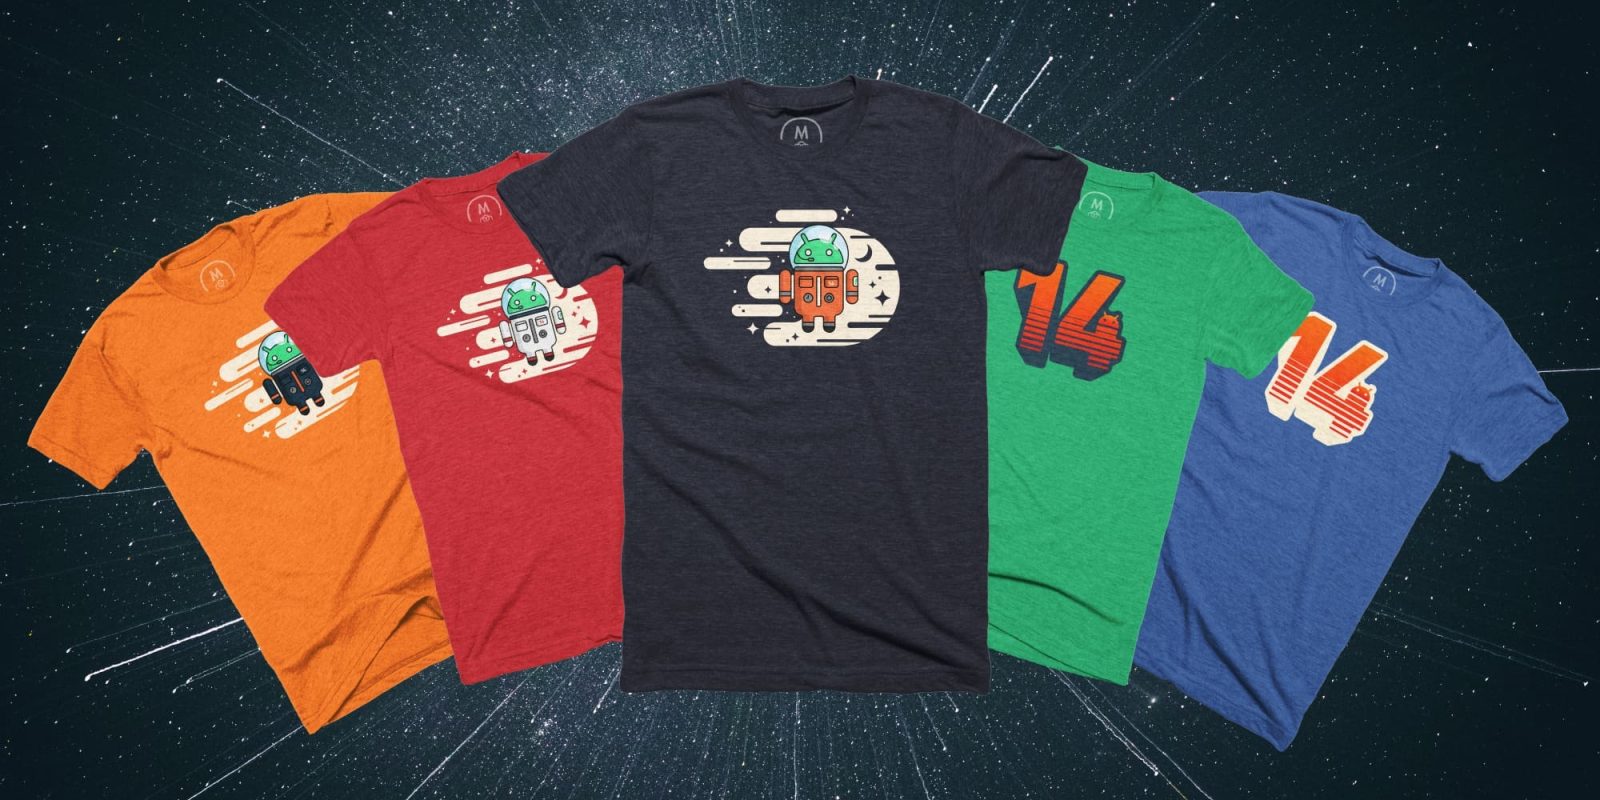 Celebrate Android 14 with 9to5Google space-inspired merch